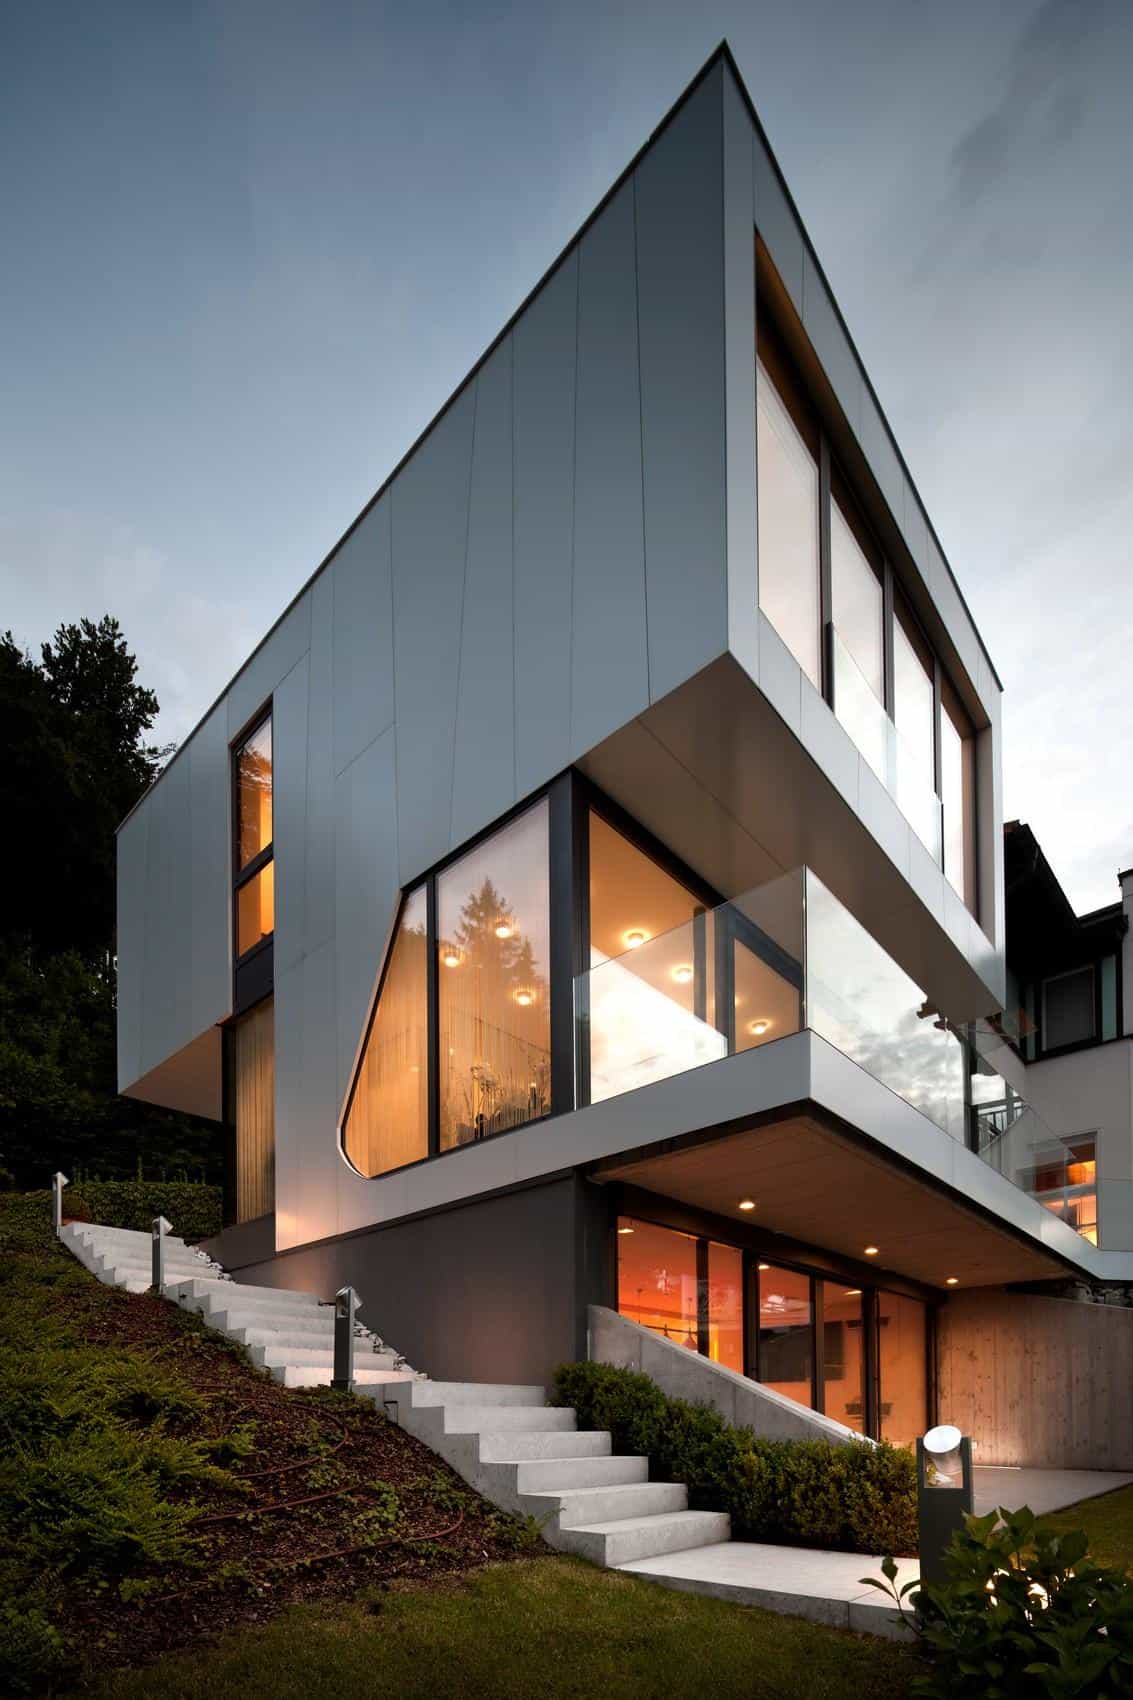 3 Storey Home Addition Takes Advantage of Dockside Views